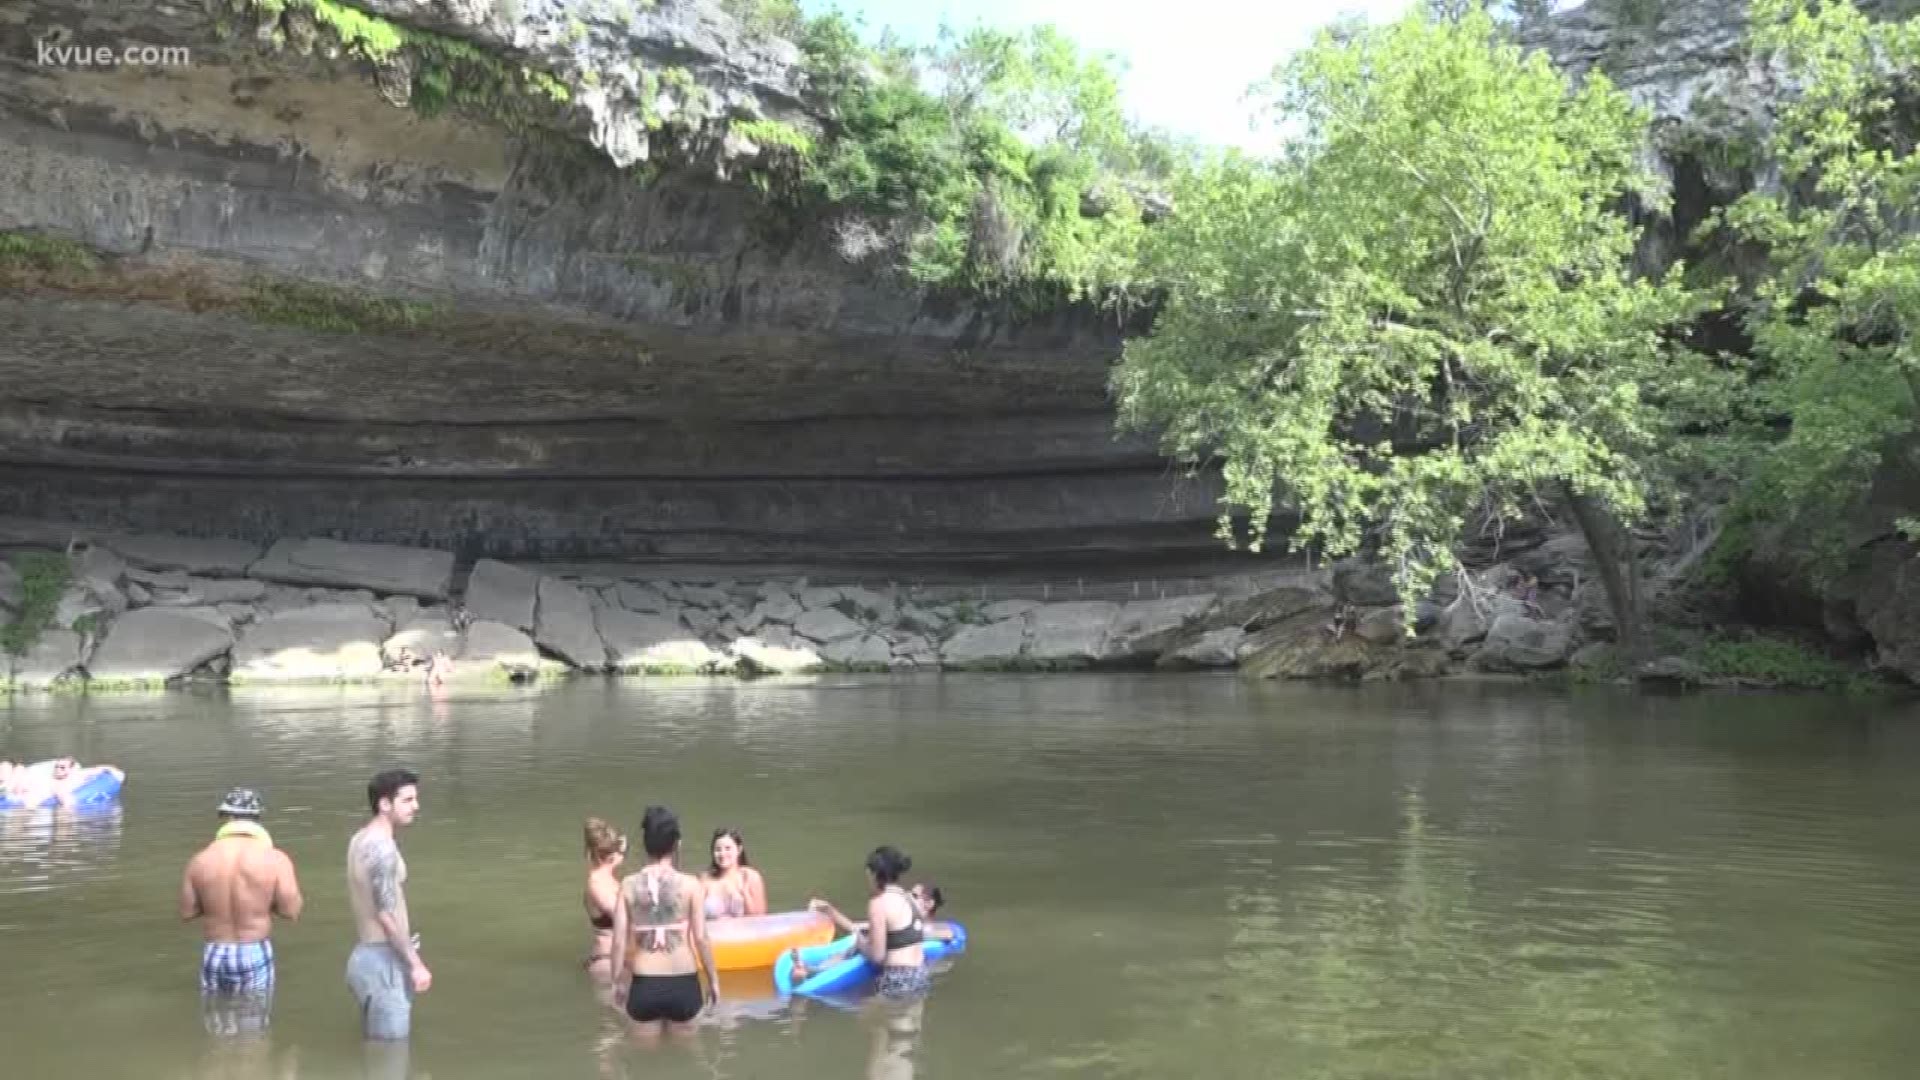 The Hamilton Pool preserve in West Travis County is a hot destination this time of year, which is why it is no surprise scalpers are trying to cash in on reservations.